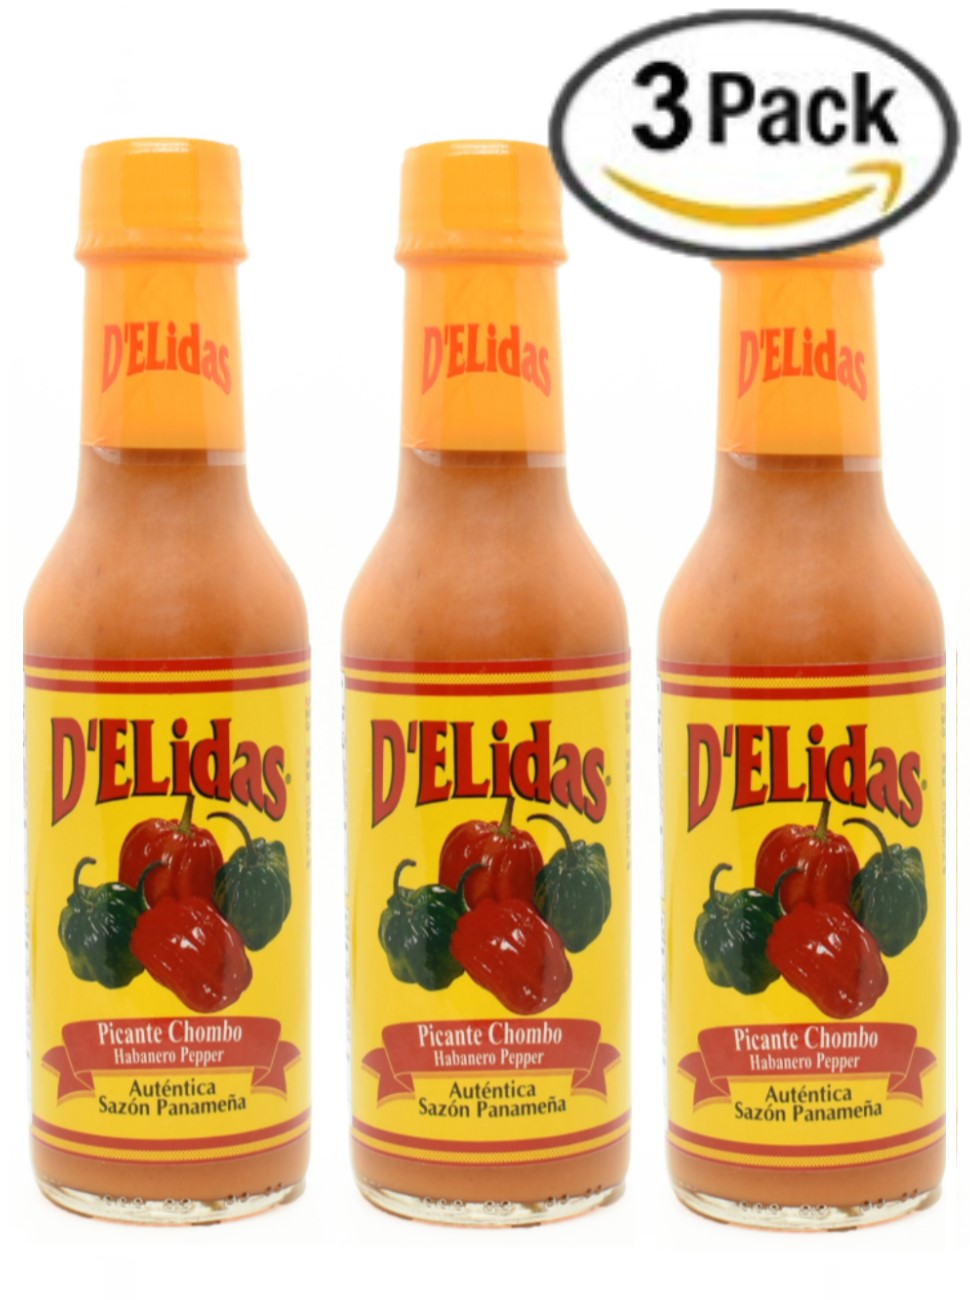 D'ELIDAS Hot Sauce Chombo Habanero Pepper Picante ALL NATURAL, (5oz) 3 PACK